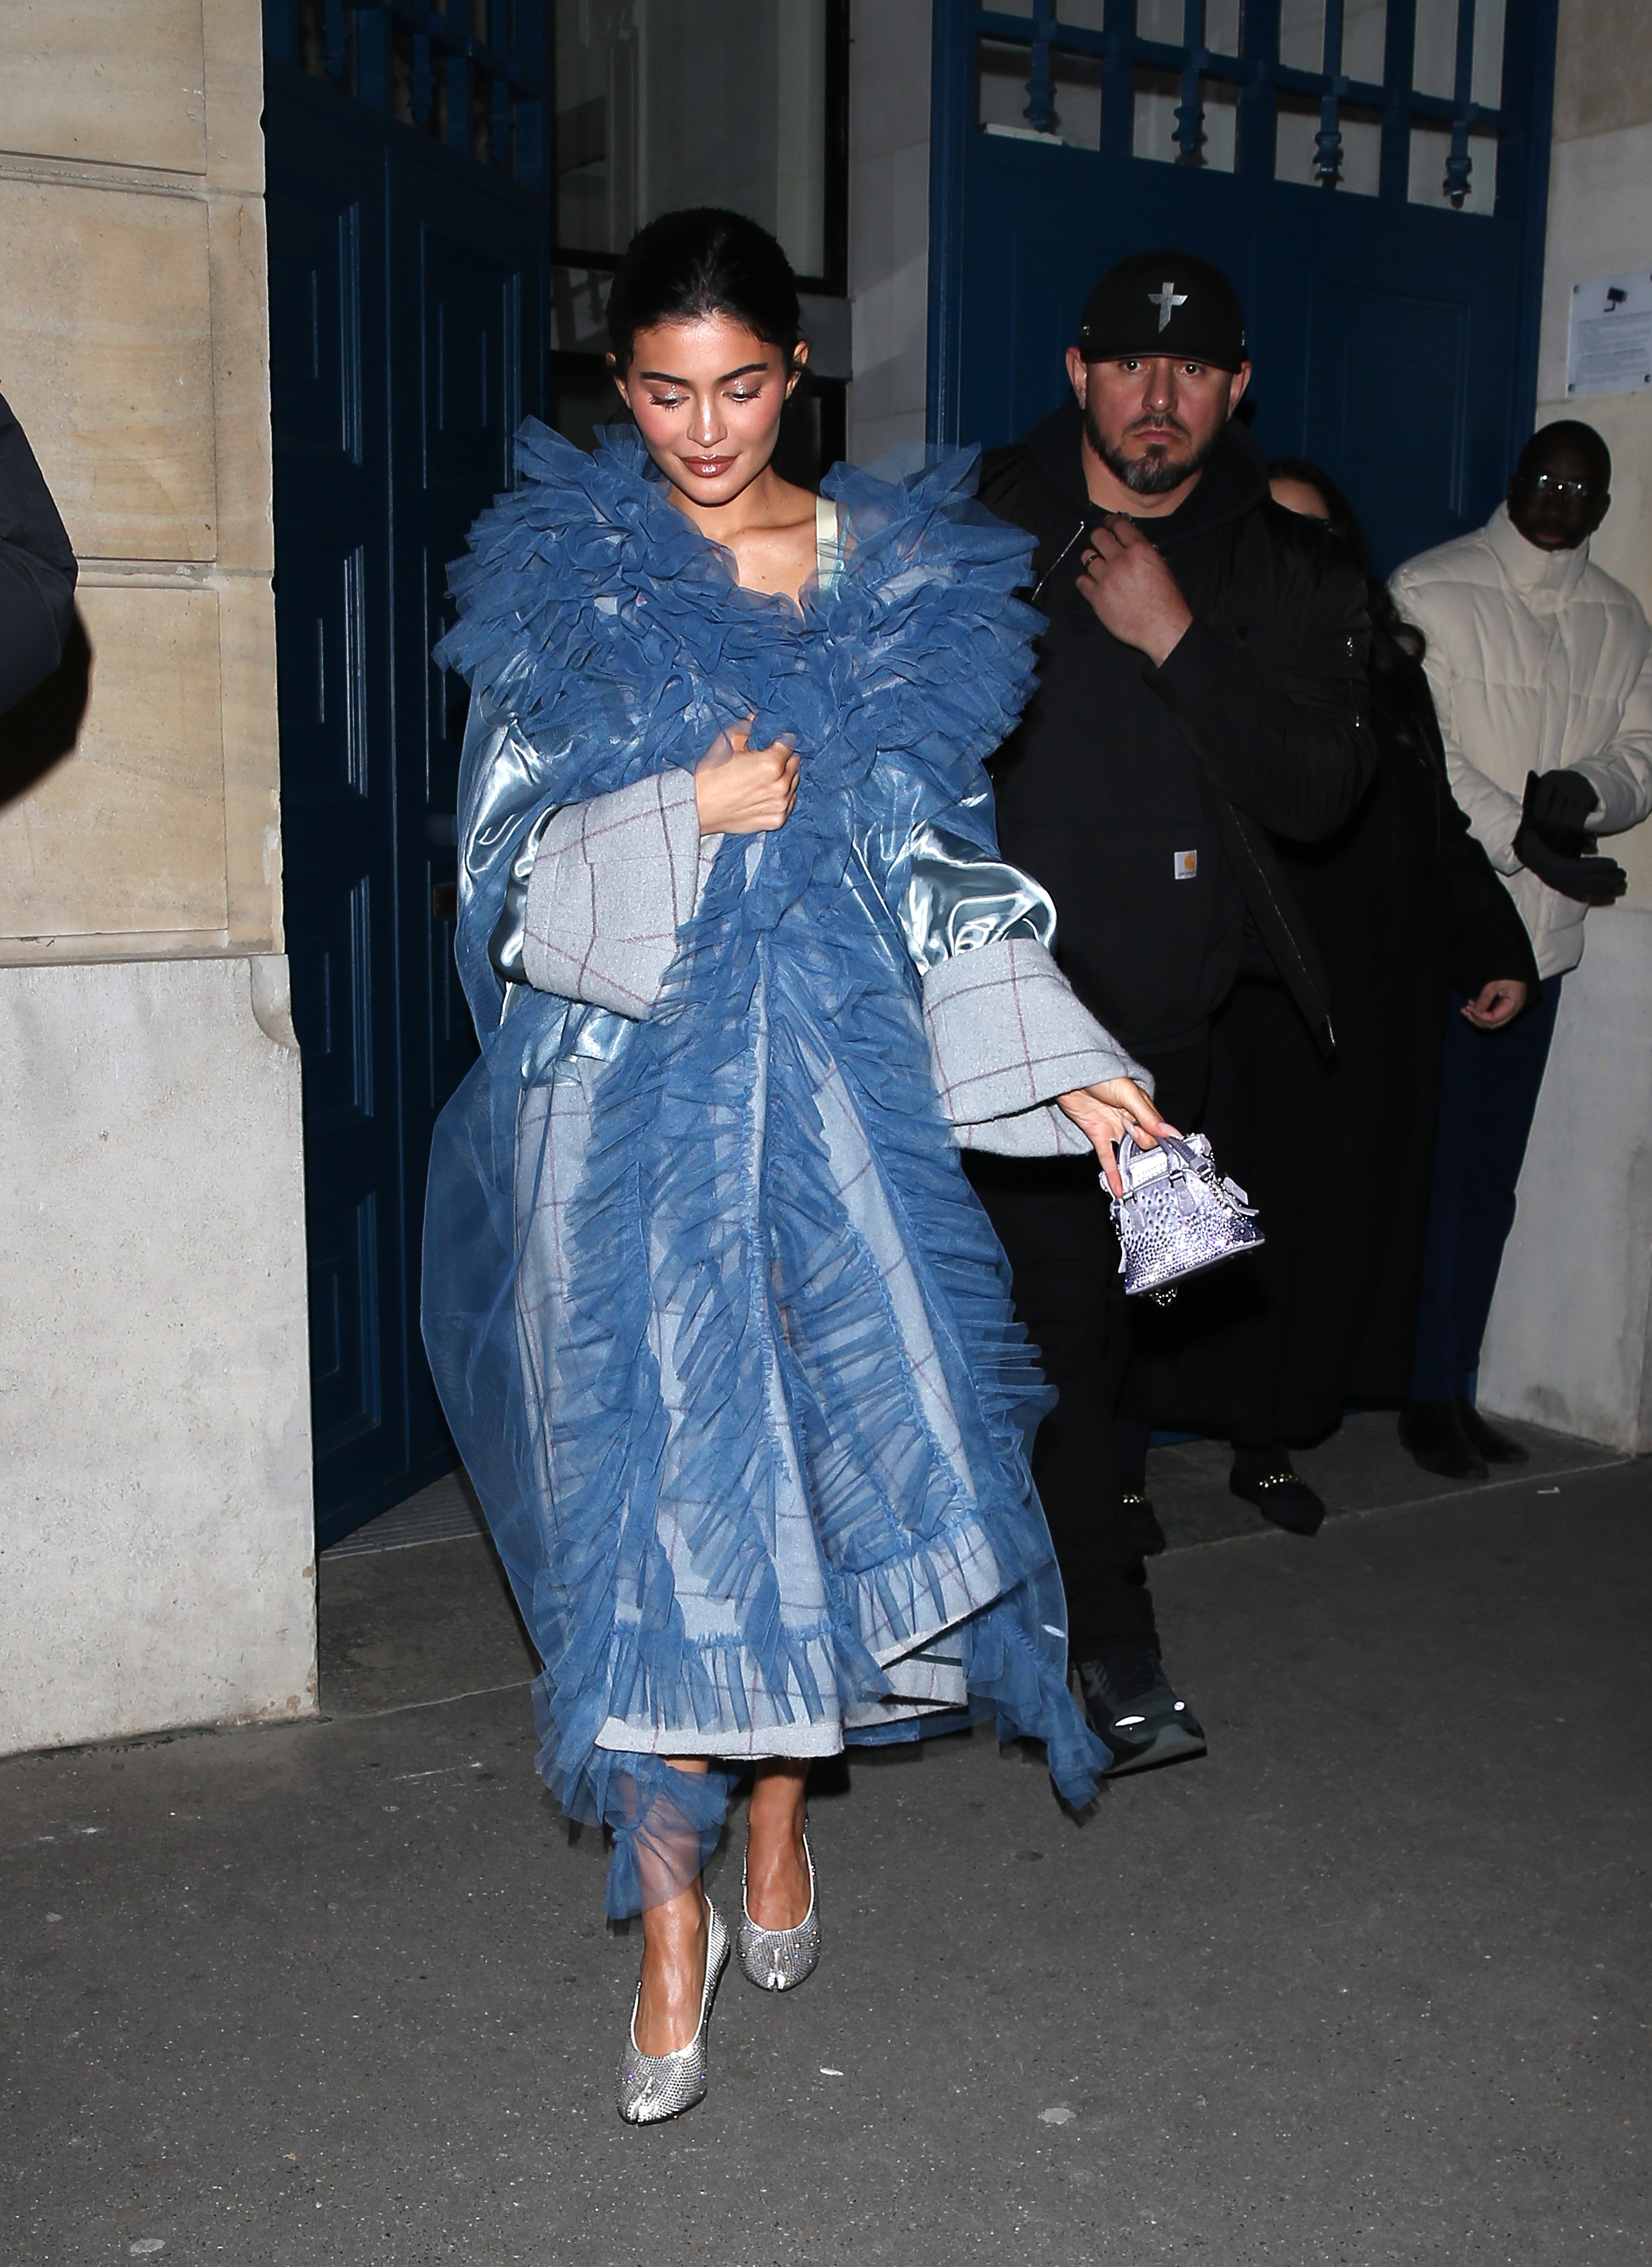 Photos from Kylie Jenner's Street Style - Page 2